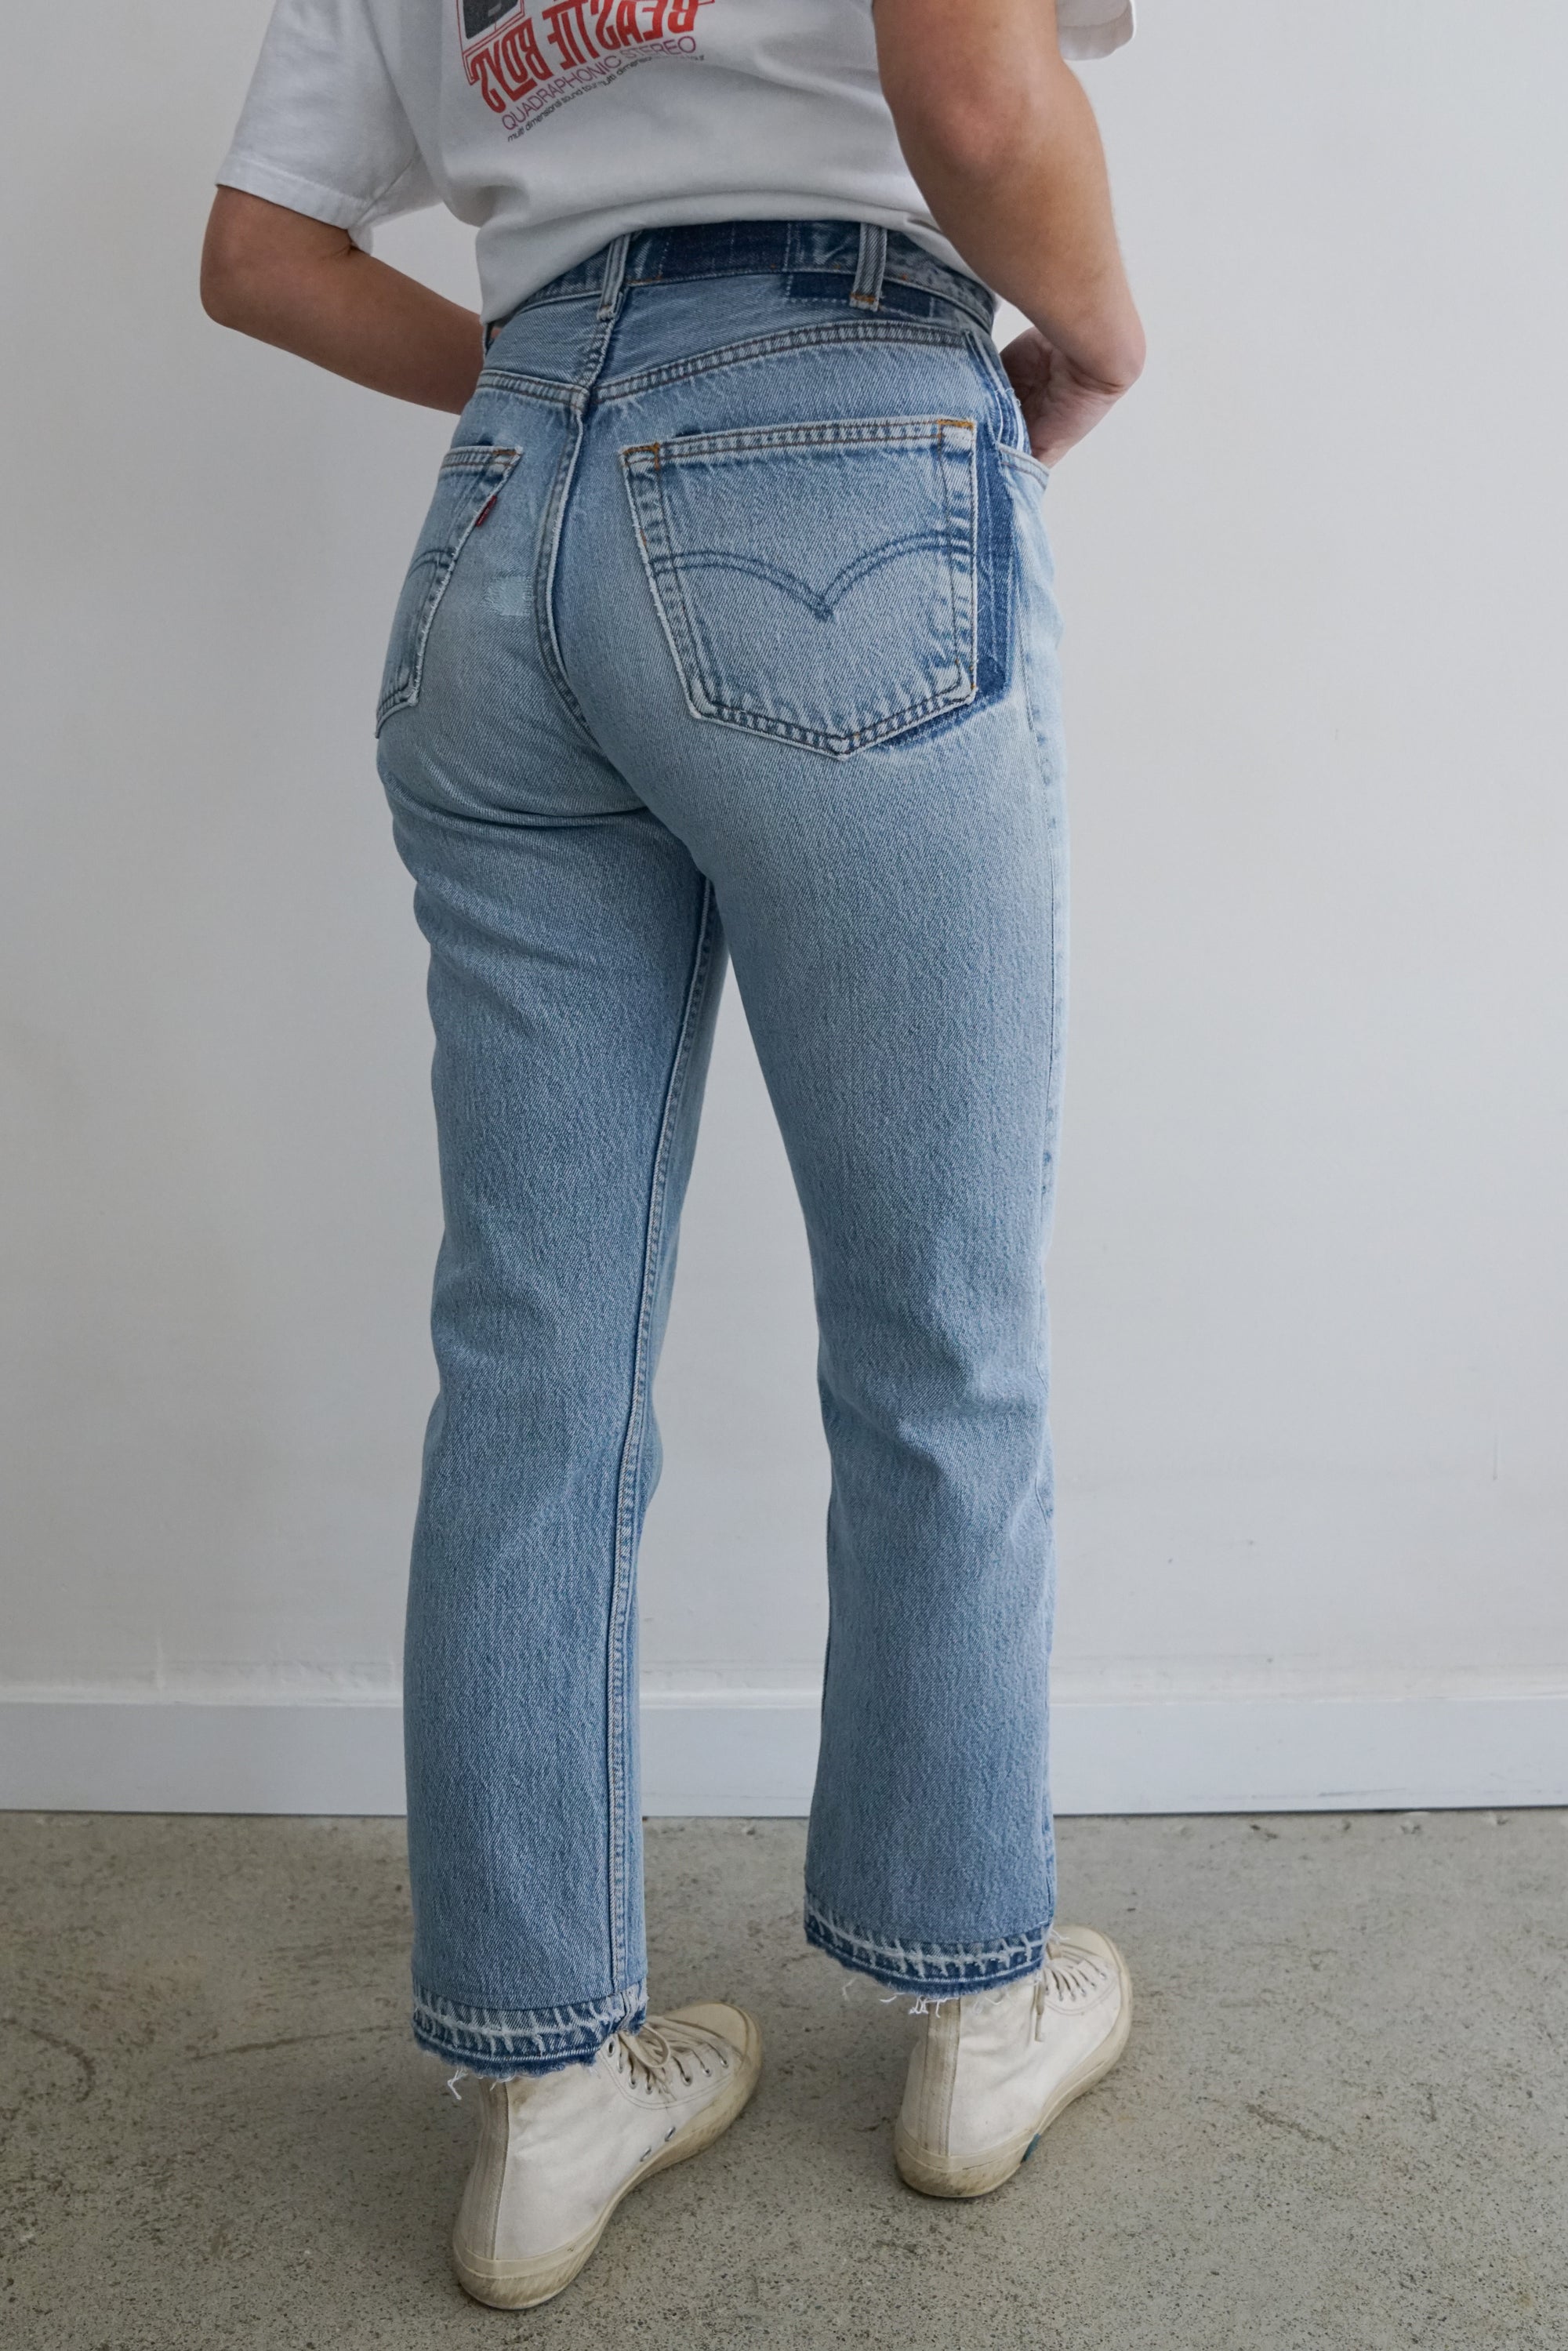 Reworked + Repaired Levis 501 27W